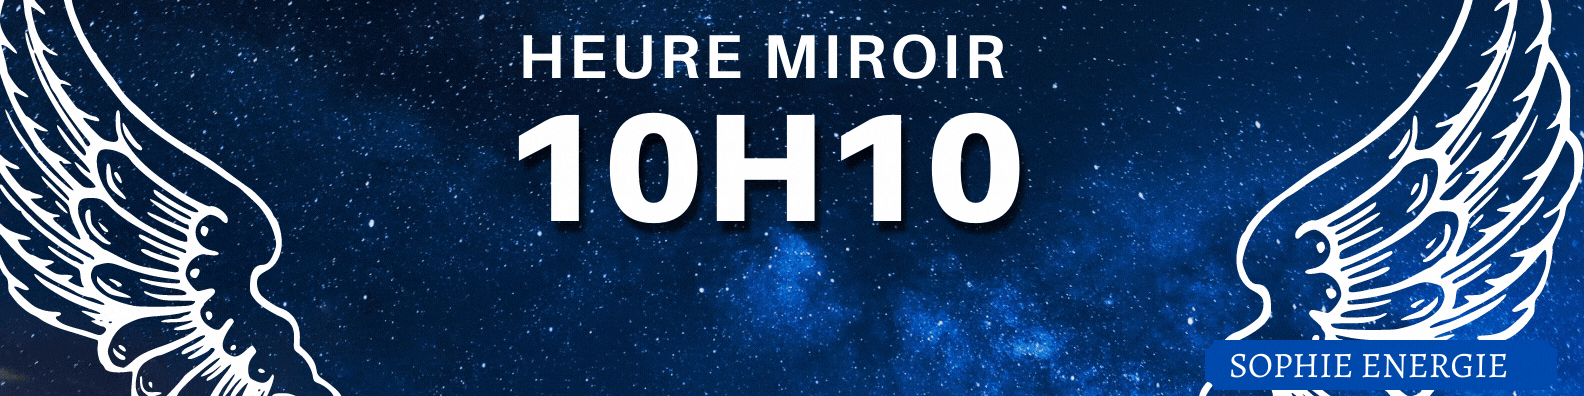 HEURE MIROIR anges 10h10